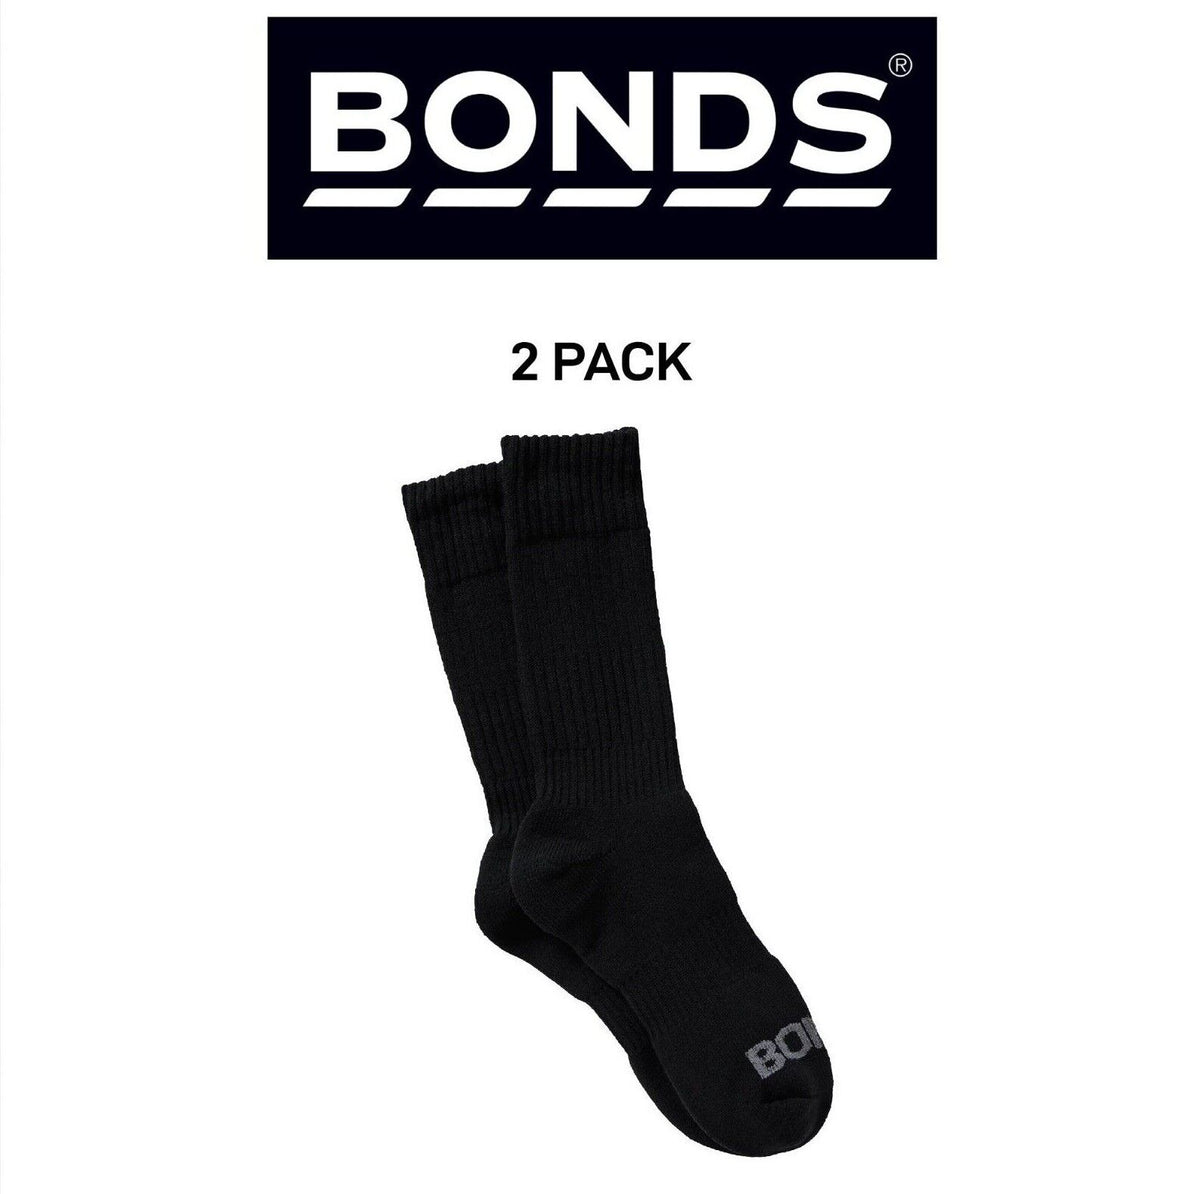 Bonds Mens Cotton Work Socks Durable Comfort and Warmth Fit 2 Pack SYPG2N